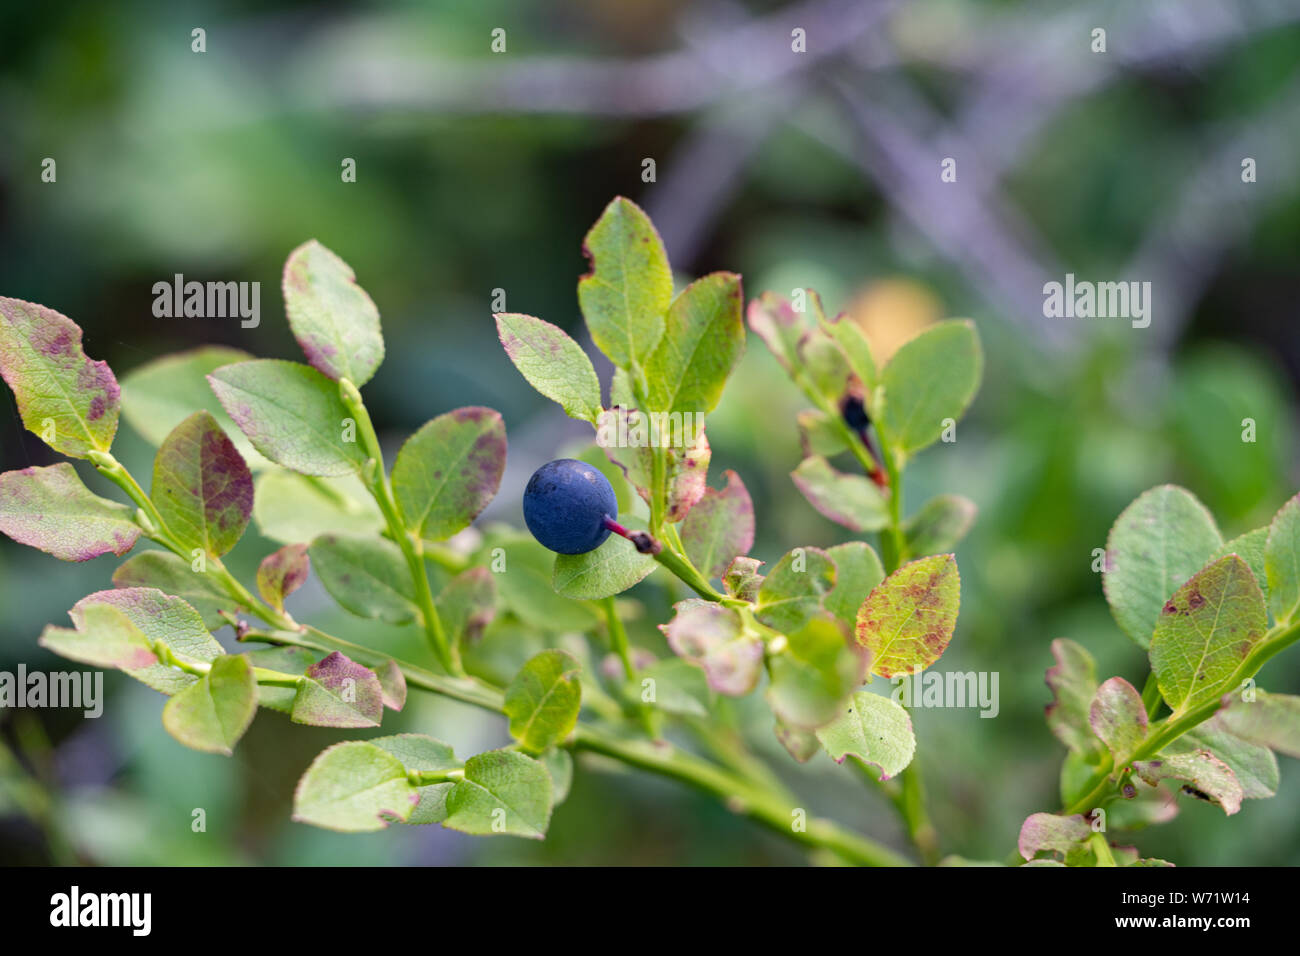 Bilberry plants (Vaccinium myrtillus) in a forest in Sweden. Known as Swedish Blueberries. Stock Photo